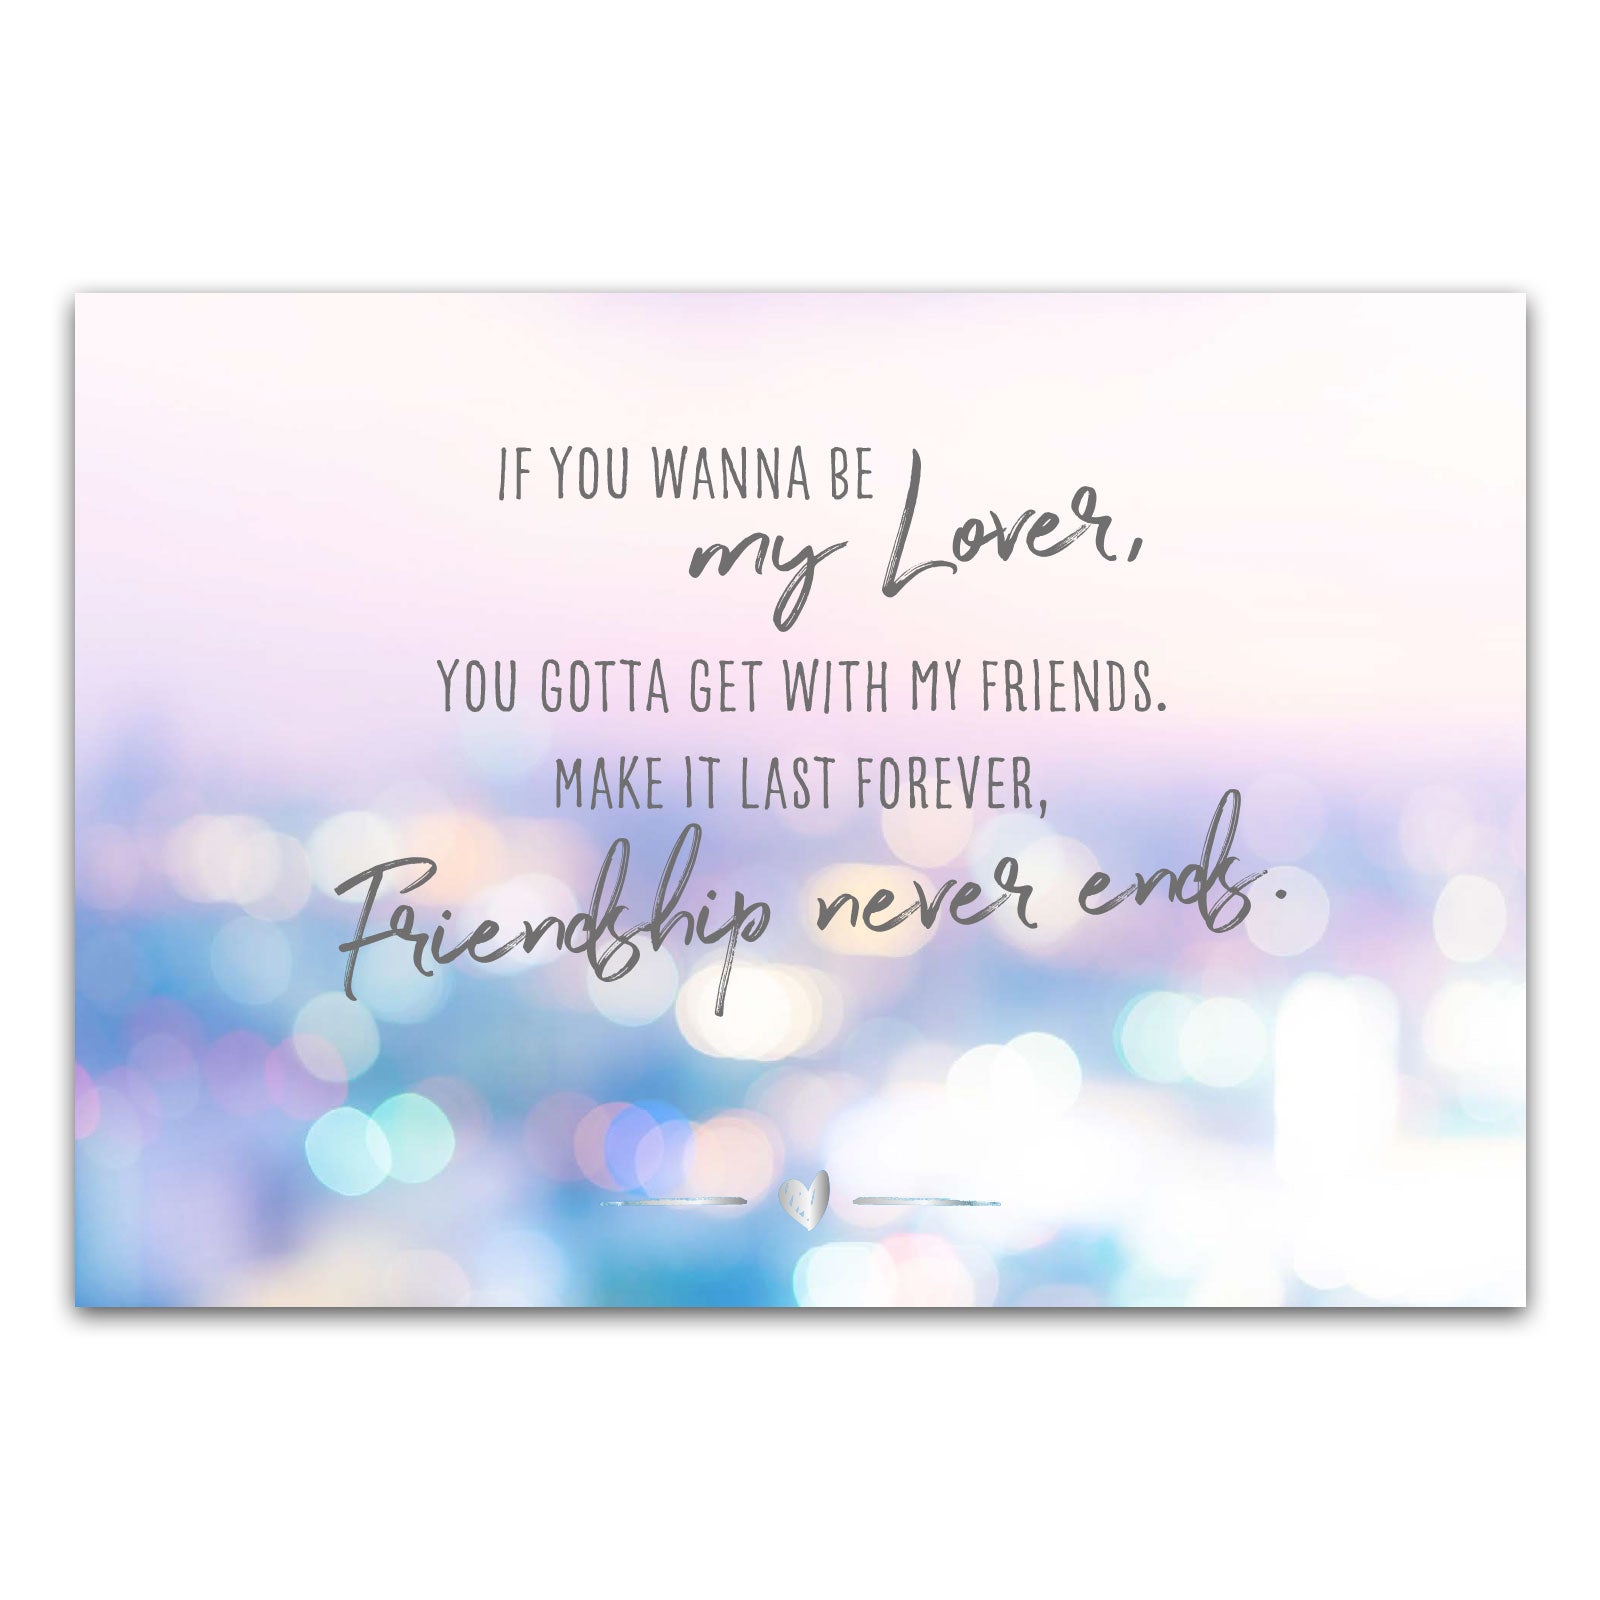 Postkarte "If you wanna be my lover, you gotta get with my friends. Make it last forever, friendship never ends."